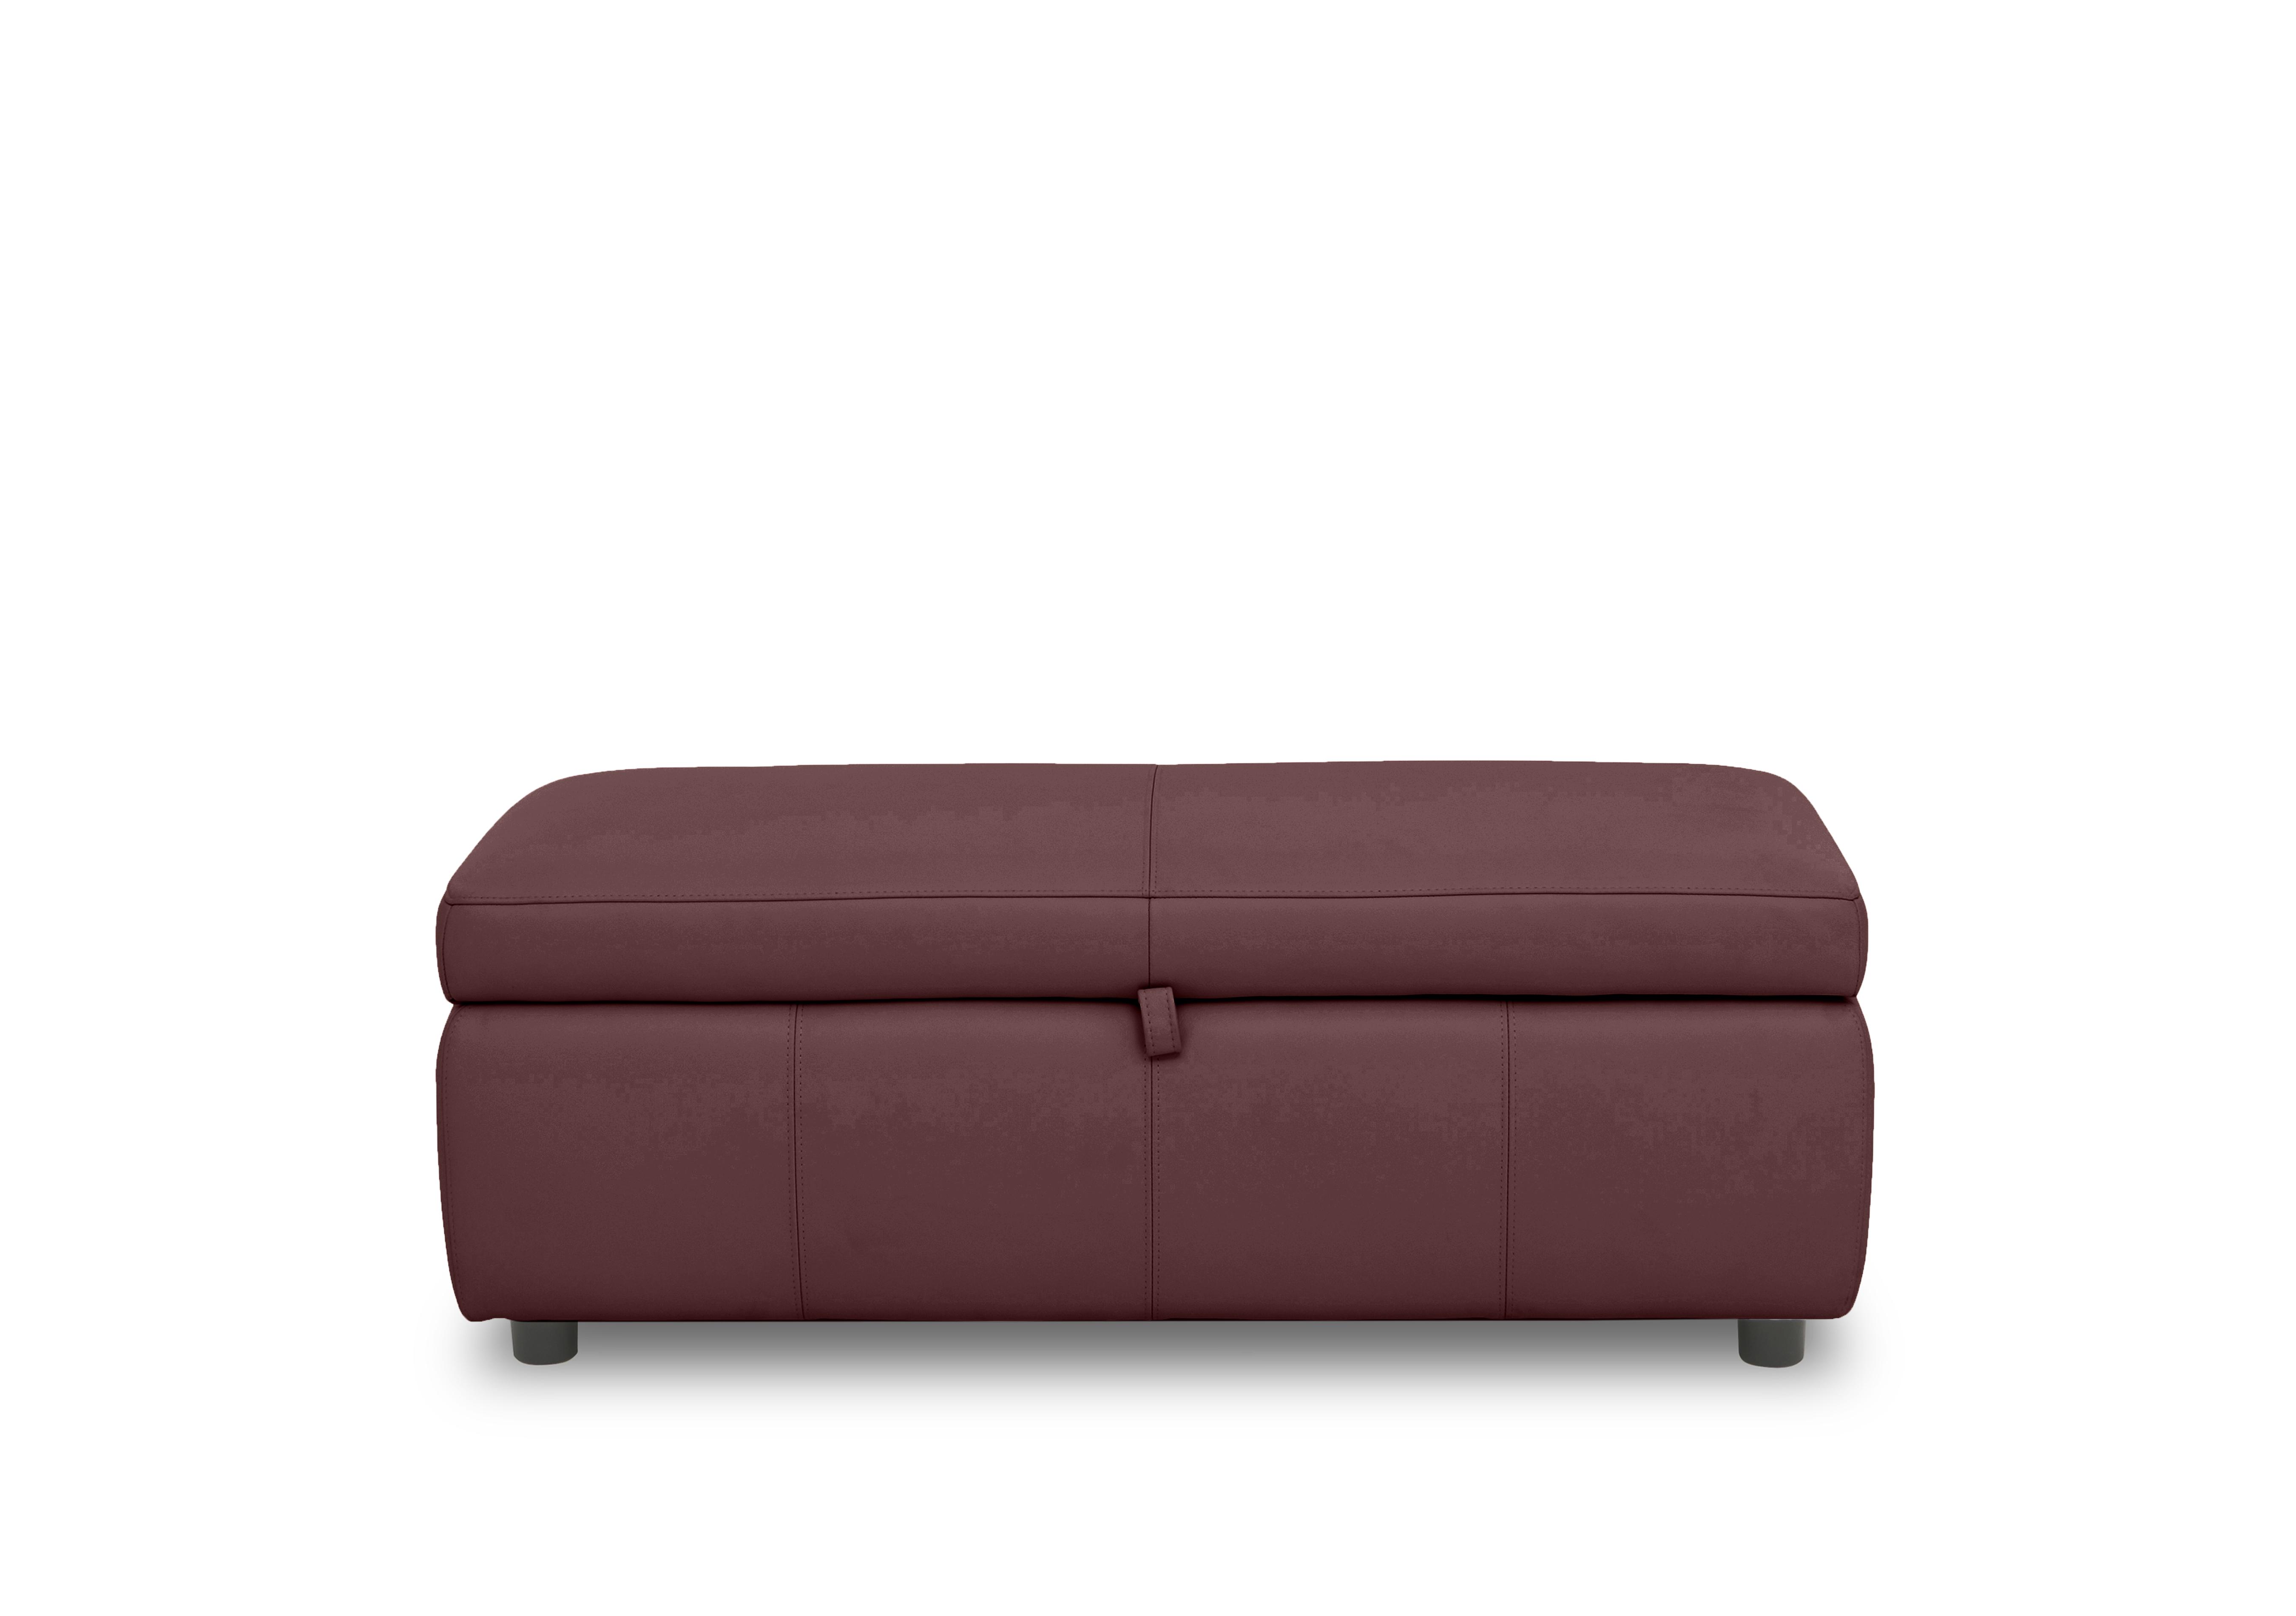 Tyrell 120cm Leather Blanket Box in Bv-035c Deep Red on Furniture Village